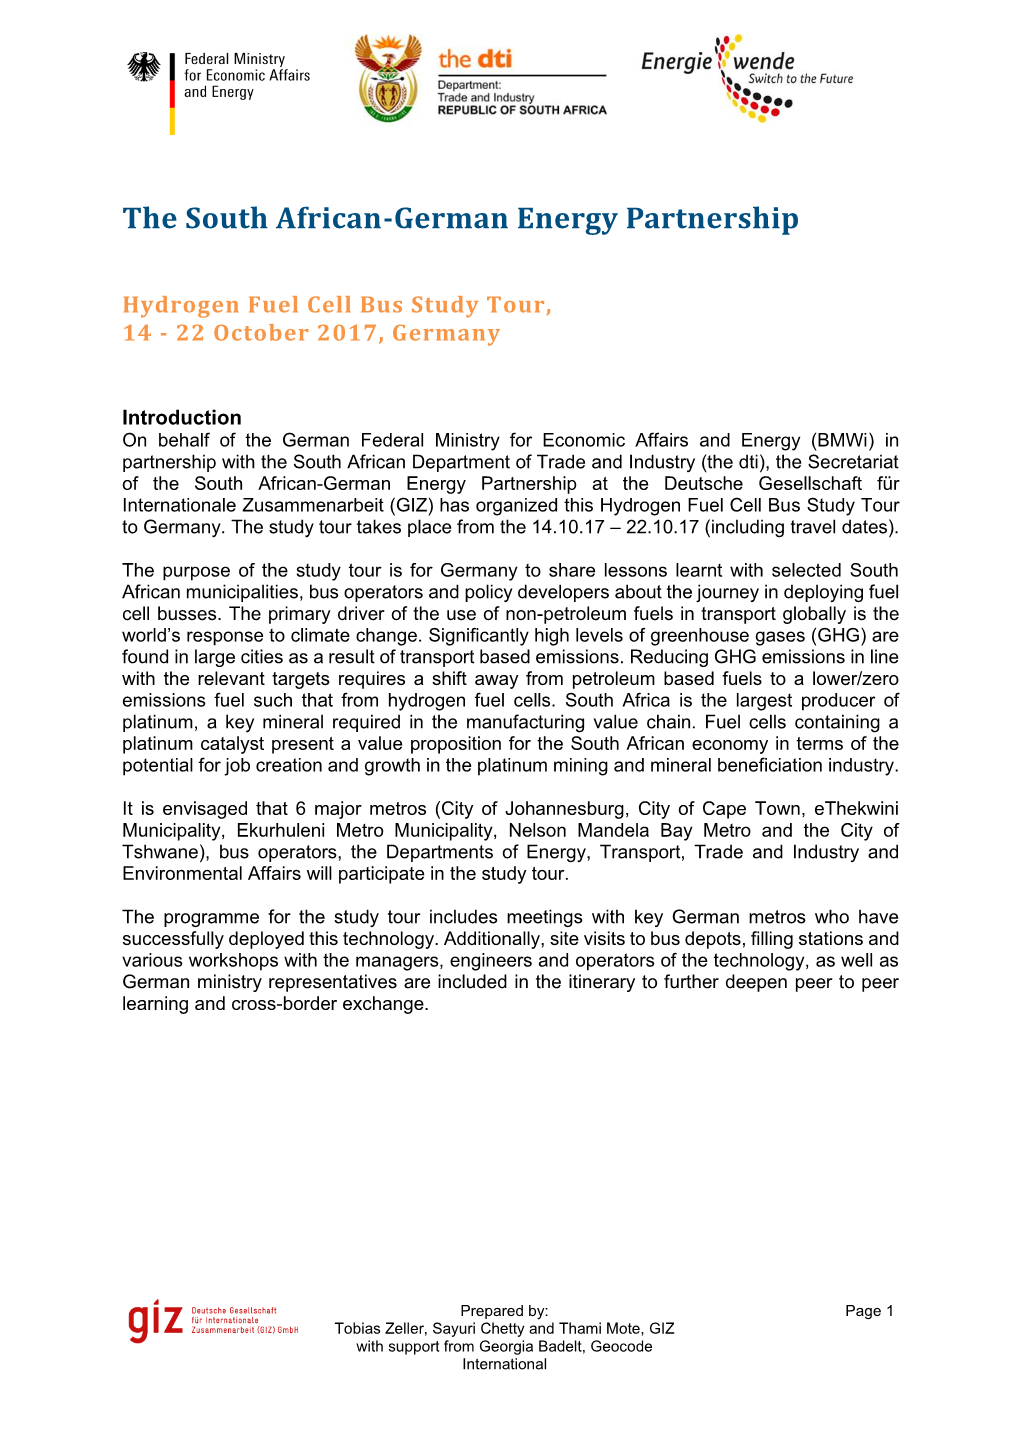 The South African-German Energy Partnership